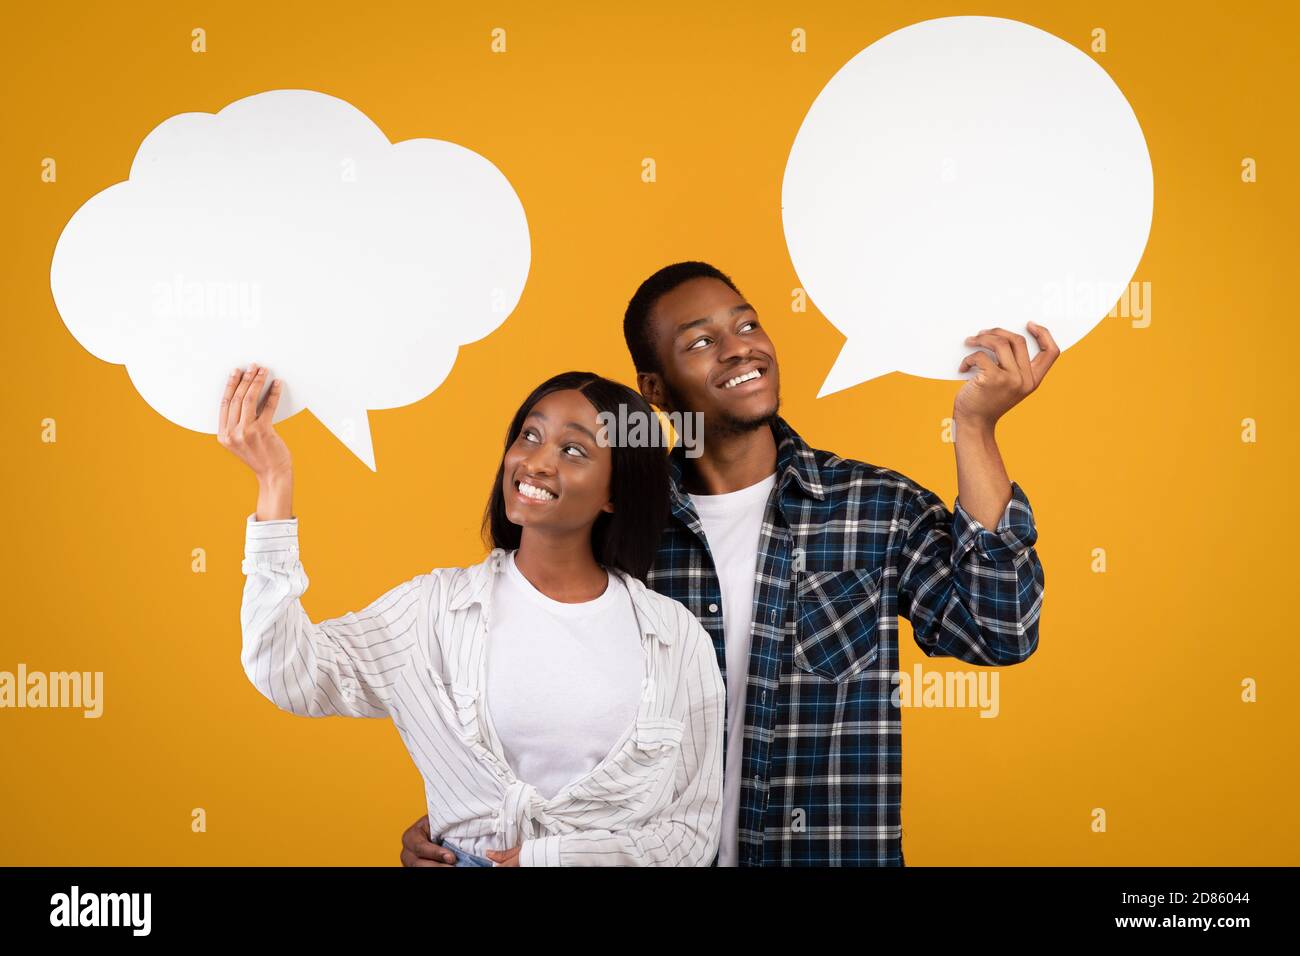 heerful pensive young african american guy and woman in casual look at abstract bubble for thoughts Stock Photo